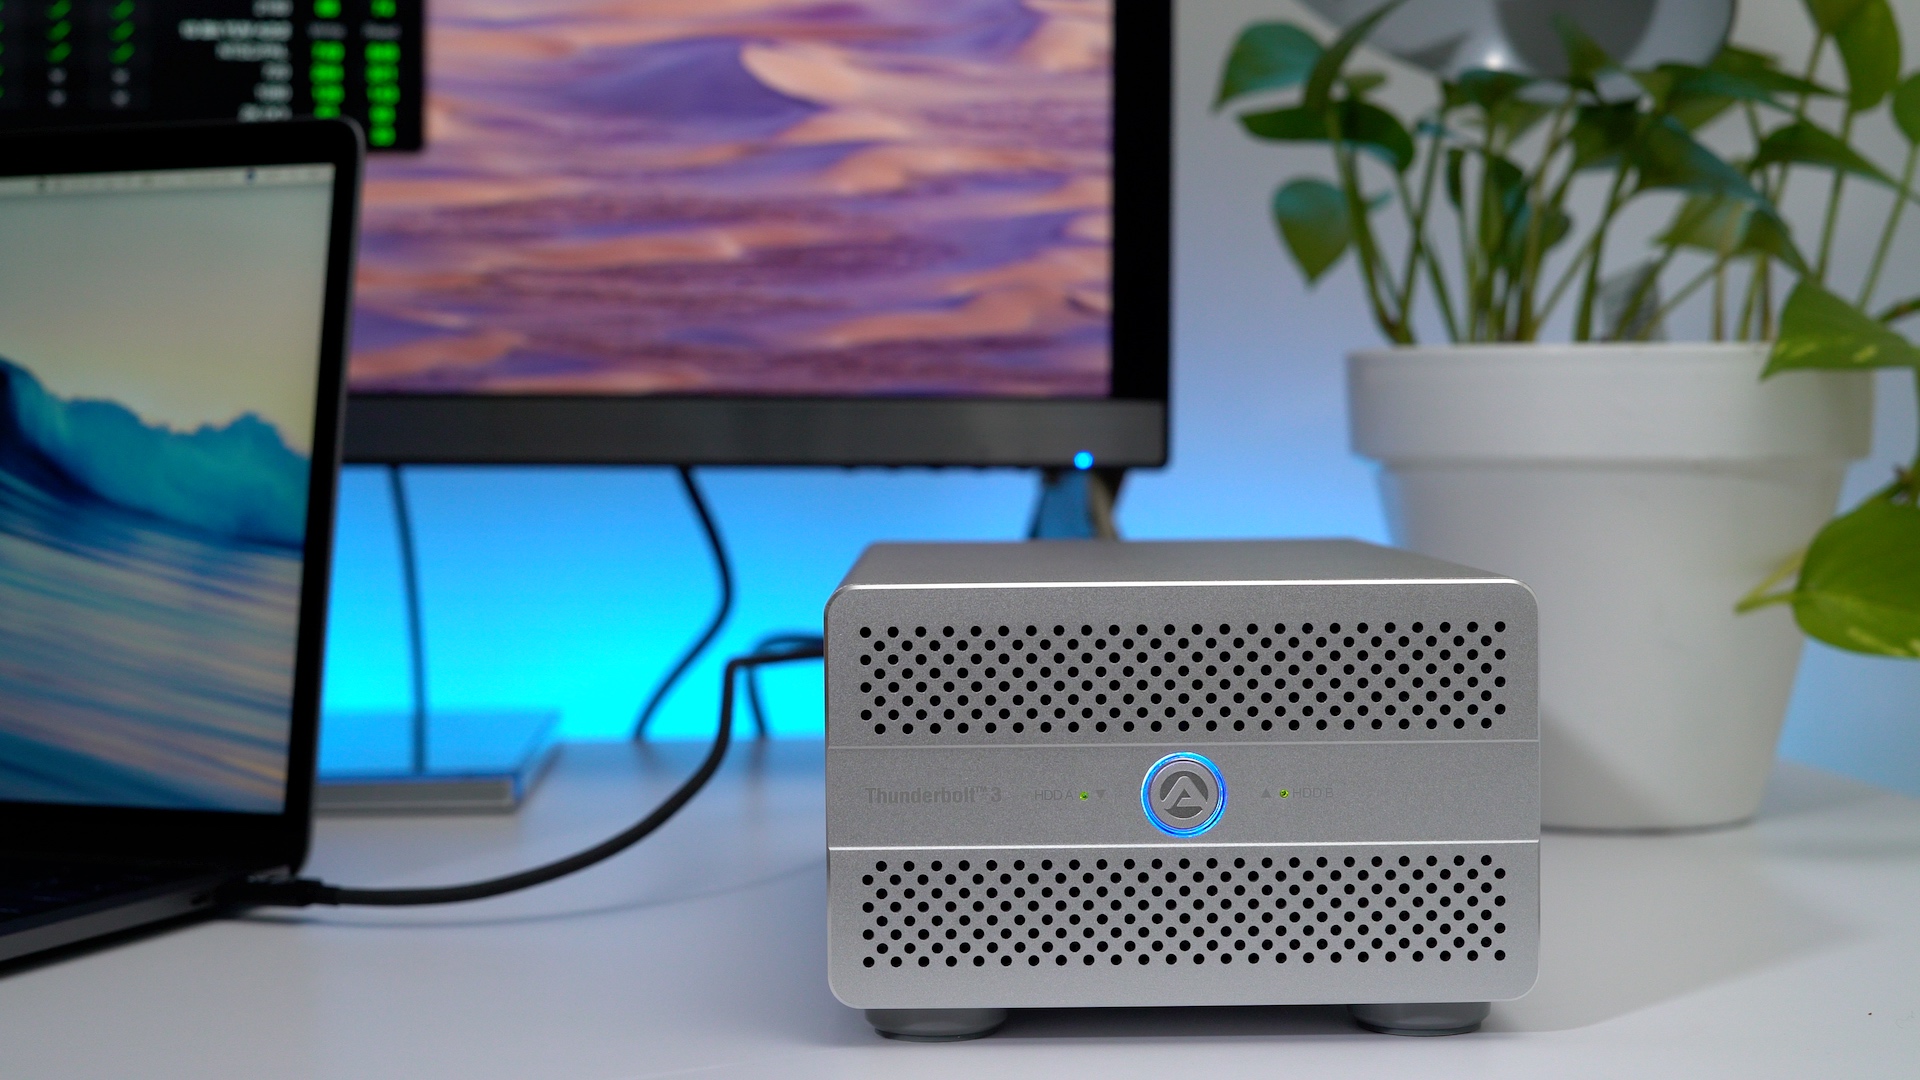 akitio-thunder3-duo-pro-quad-review-displayport-thunderbolt-3-connected